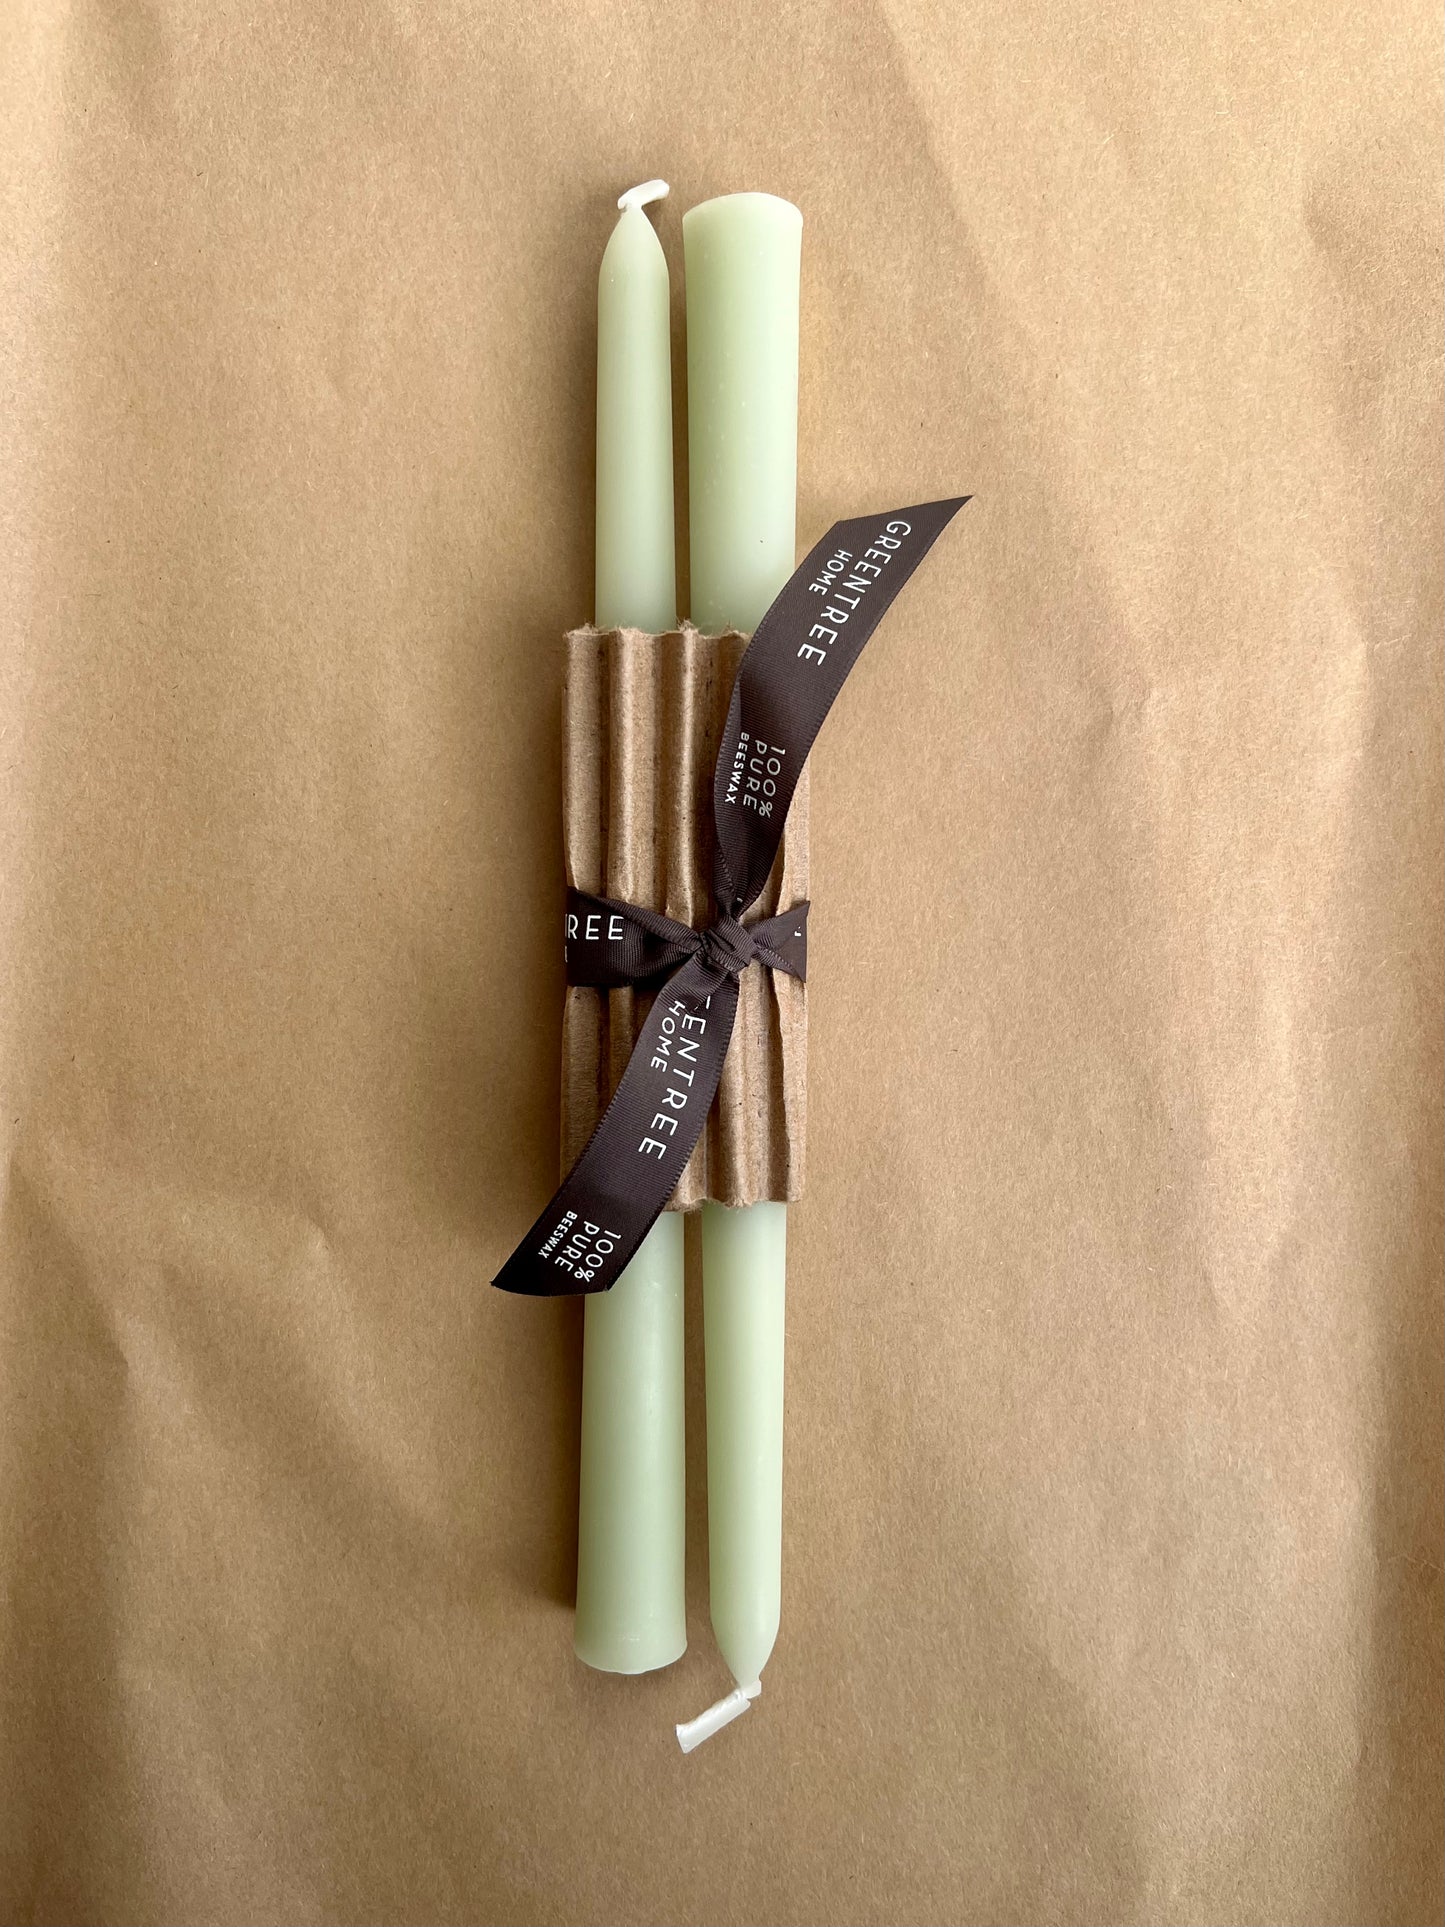 Everyday Tapers are "classic" candles. What makes a classic a classic? Beautiful anytime and anywhere – simple, meaningful, and perfect for every kind of occasion.  Set of 2, 100% pure North American beeswax candles. Each candle is hand poured and individually finished in New York State. celadon